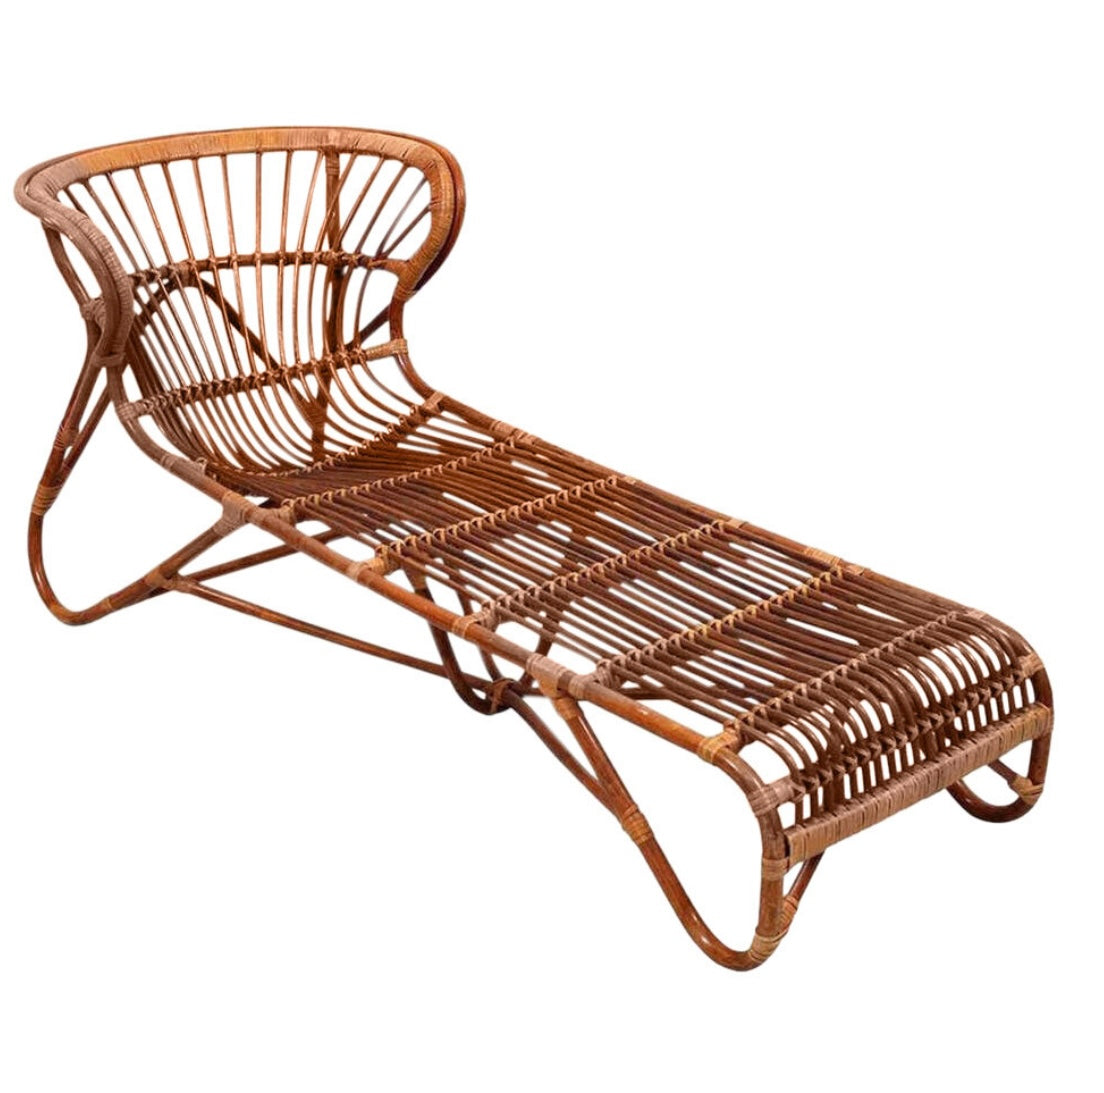 1960’s rare bamboo lounge chair attributed to Franco Albini